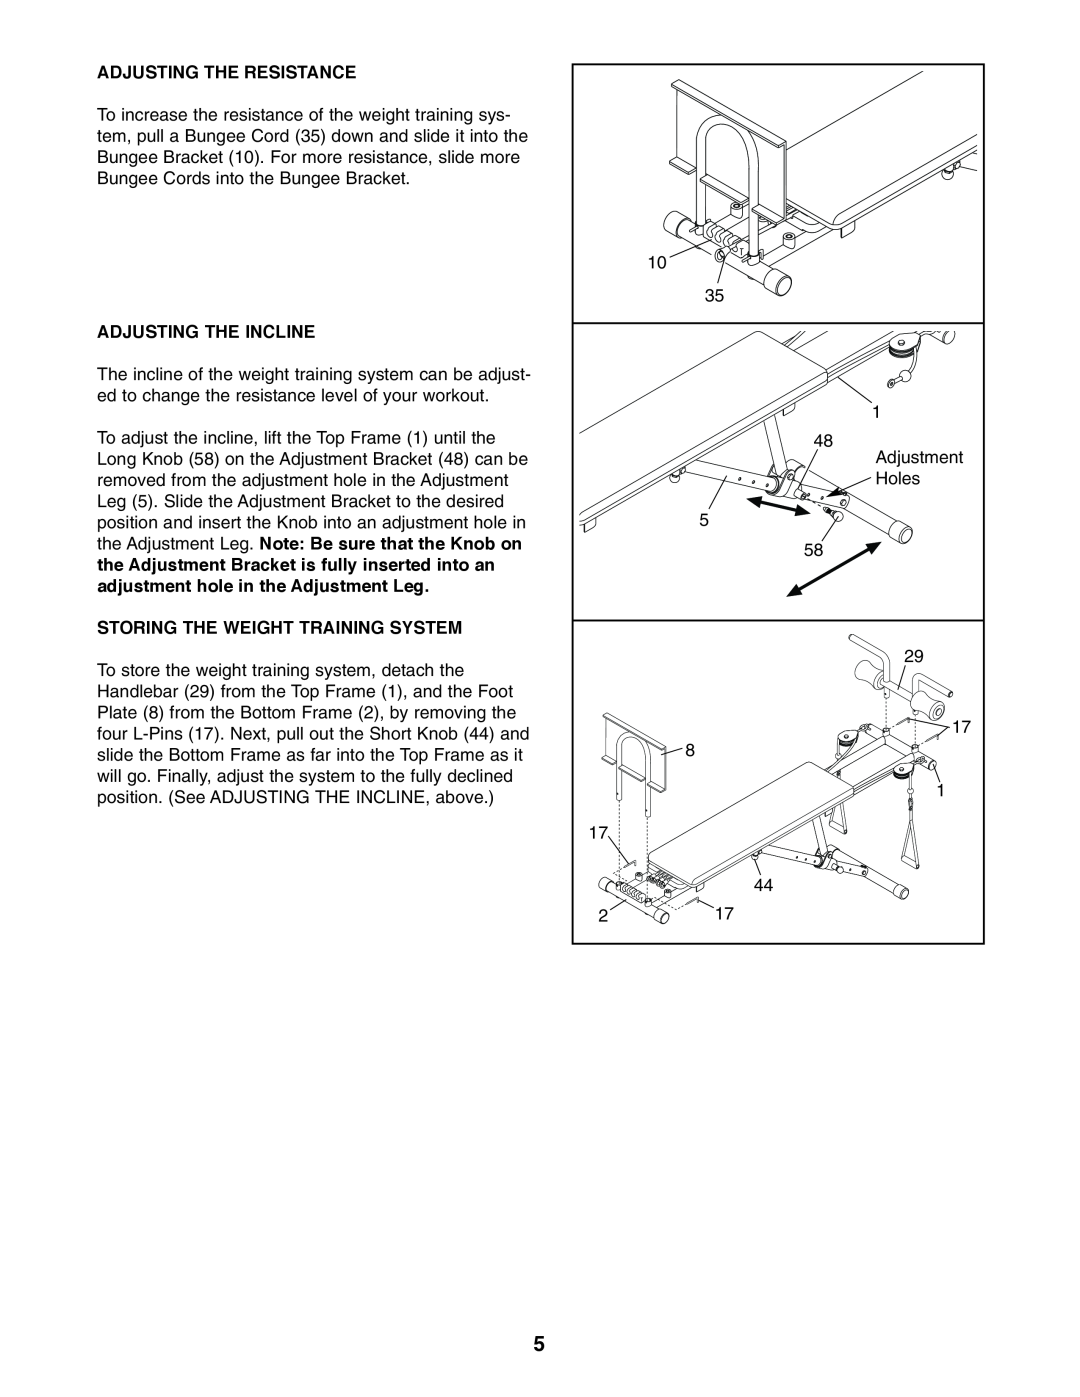 Weider 5000 user manual Adjusting The Resistance, Adjusting The Incline, Storing The Weight Training System 